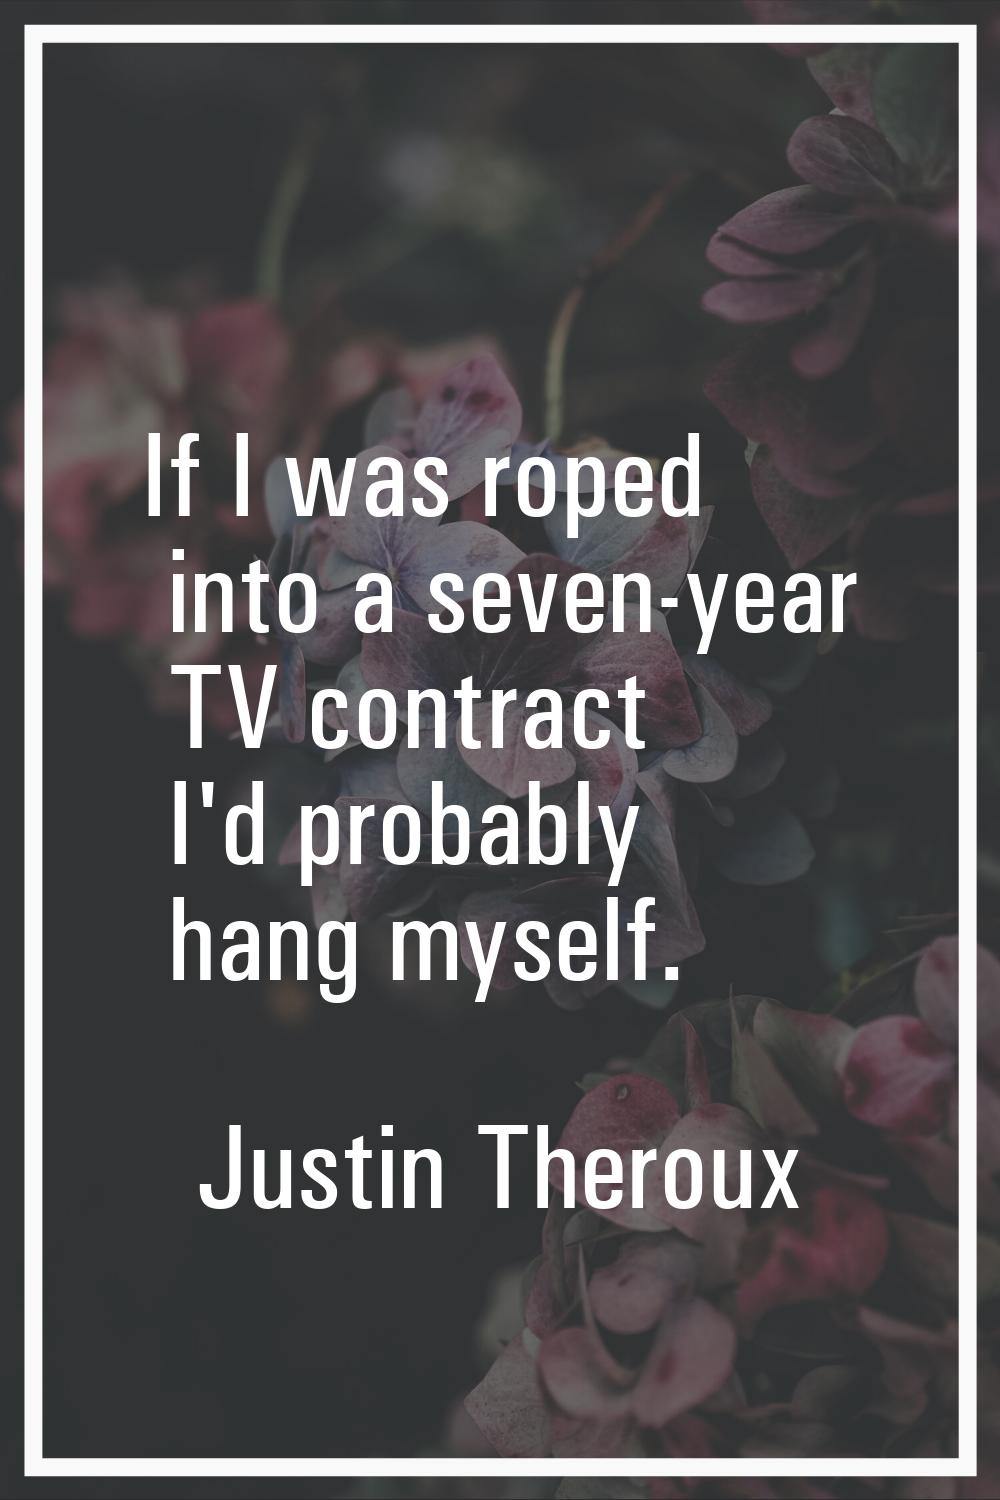 If I was roped into a seven-year TV contract I'd probably hang myself.